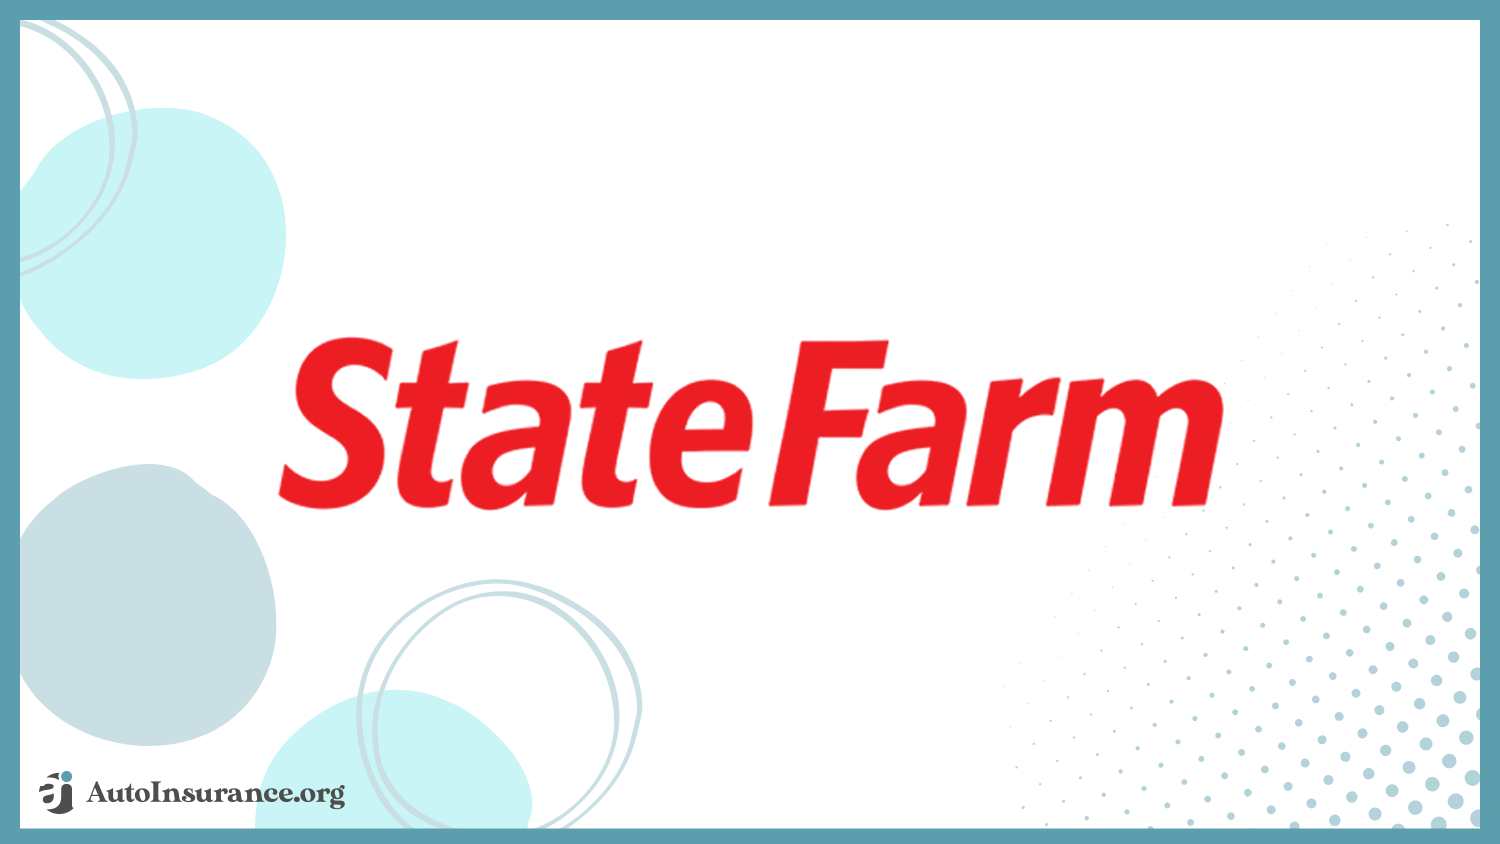 State Farm: Best Auto Insurance Companies According to Consumer Reports